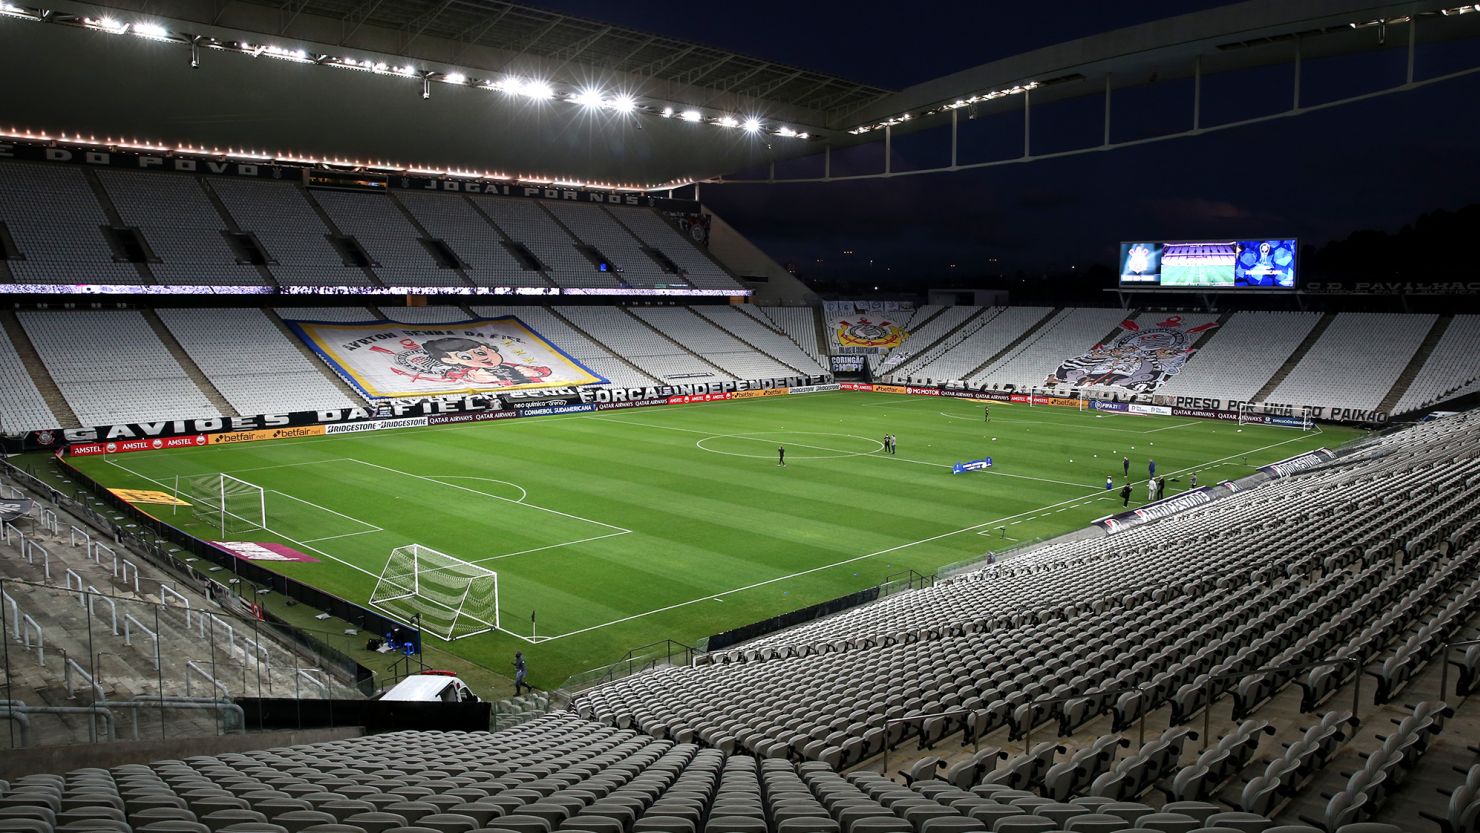 SAO PAULO, BRAZIL - APRIL 29: General view of the empty stadium prior to a match between Corinthians and Peñarol as part of Group E of Copa CONMEBOL Sudamericana 2021 at Arena Corinthians on April 29, 2021 in Sao Paulo, Brazil. (Photo by Alexandre Schneider/Getty Images)